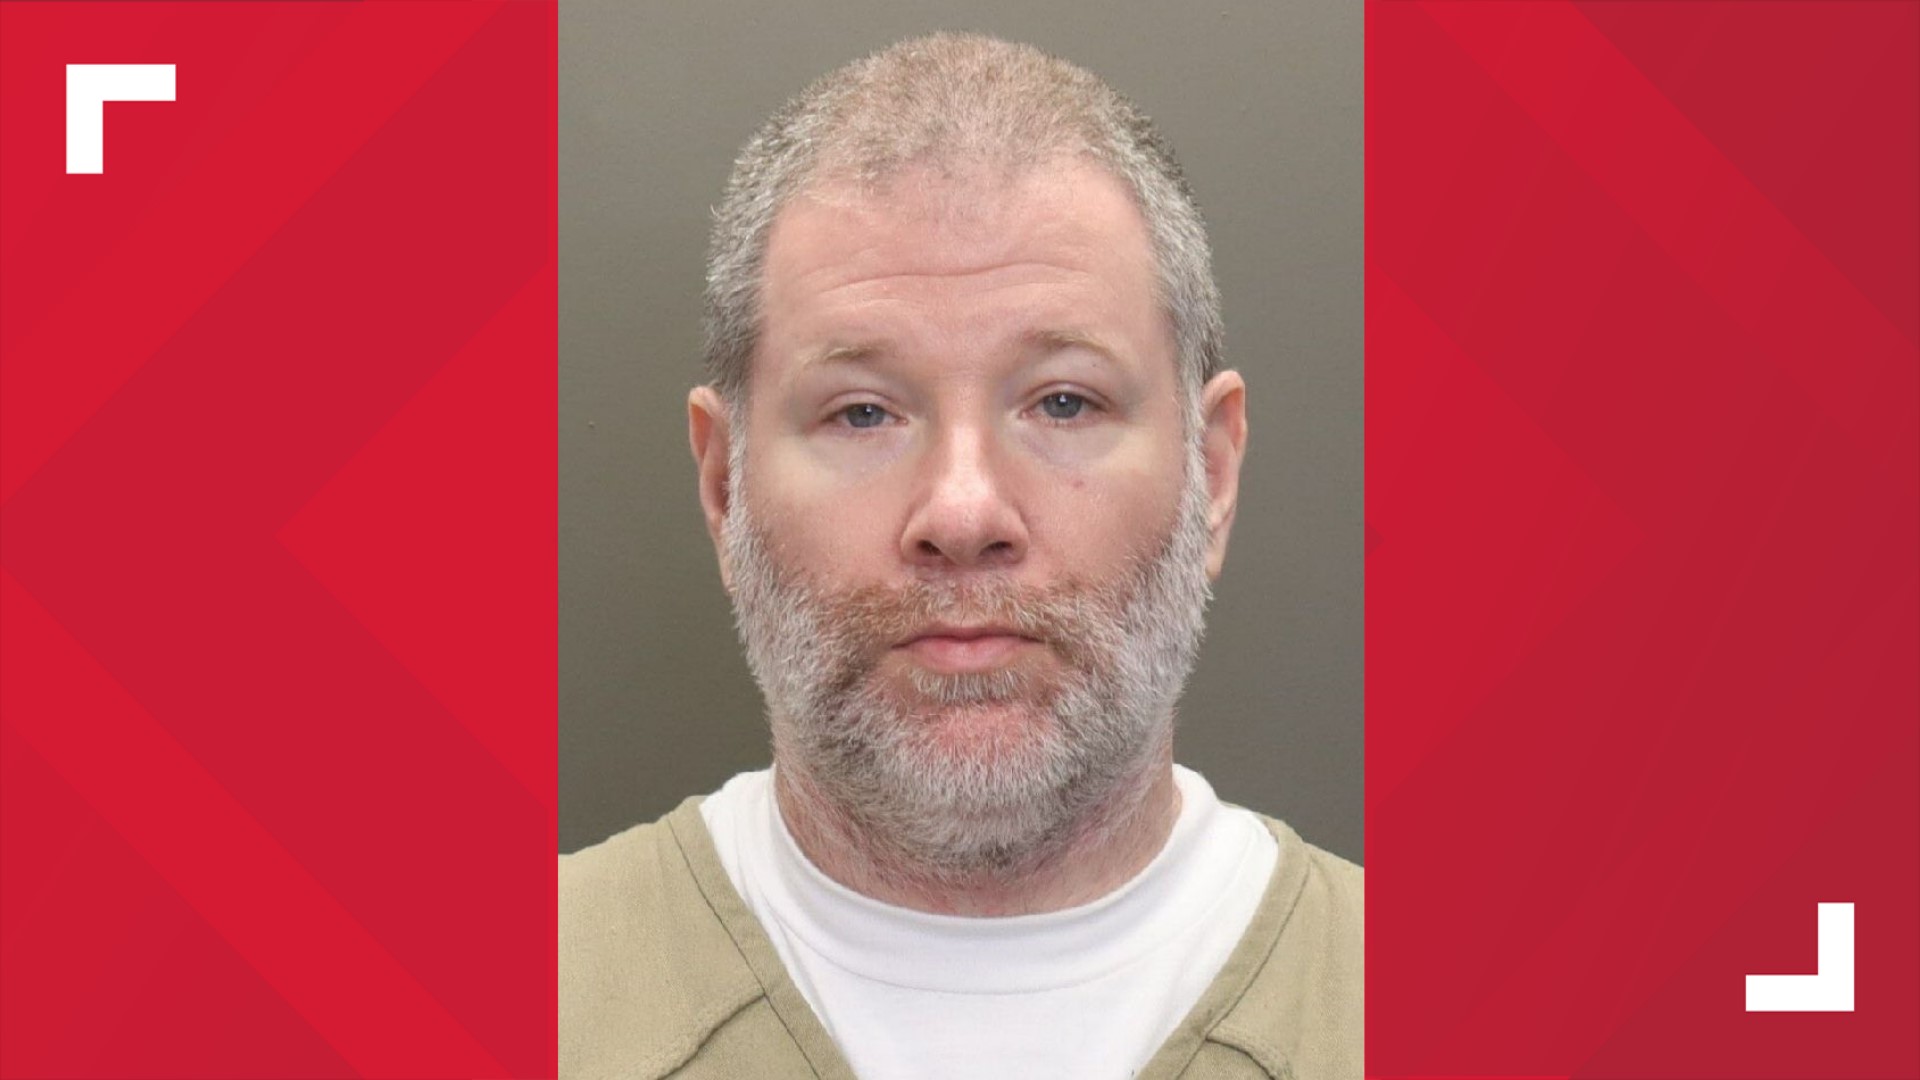 The plea agreement requires Patrick Saultz to pay restitution to the sex trafficking victims and forfeit his rights to all property seized during the investigation.